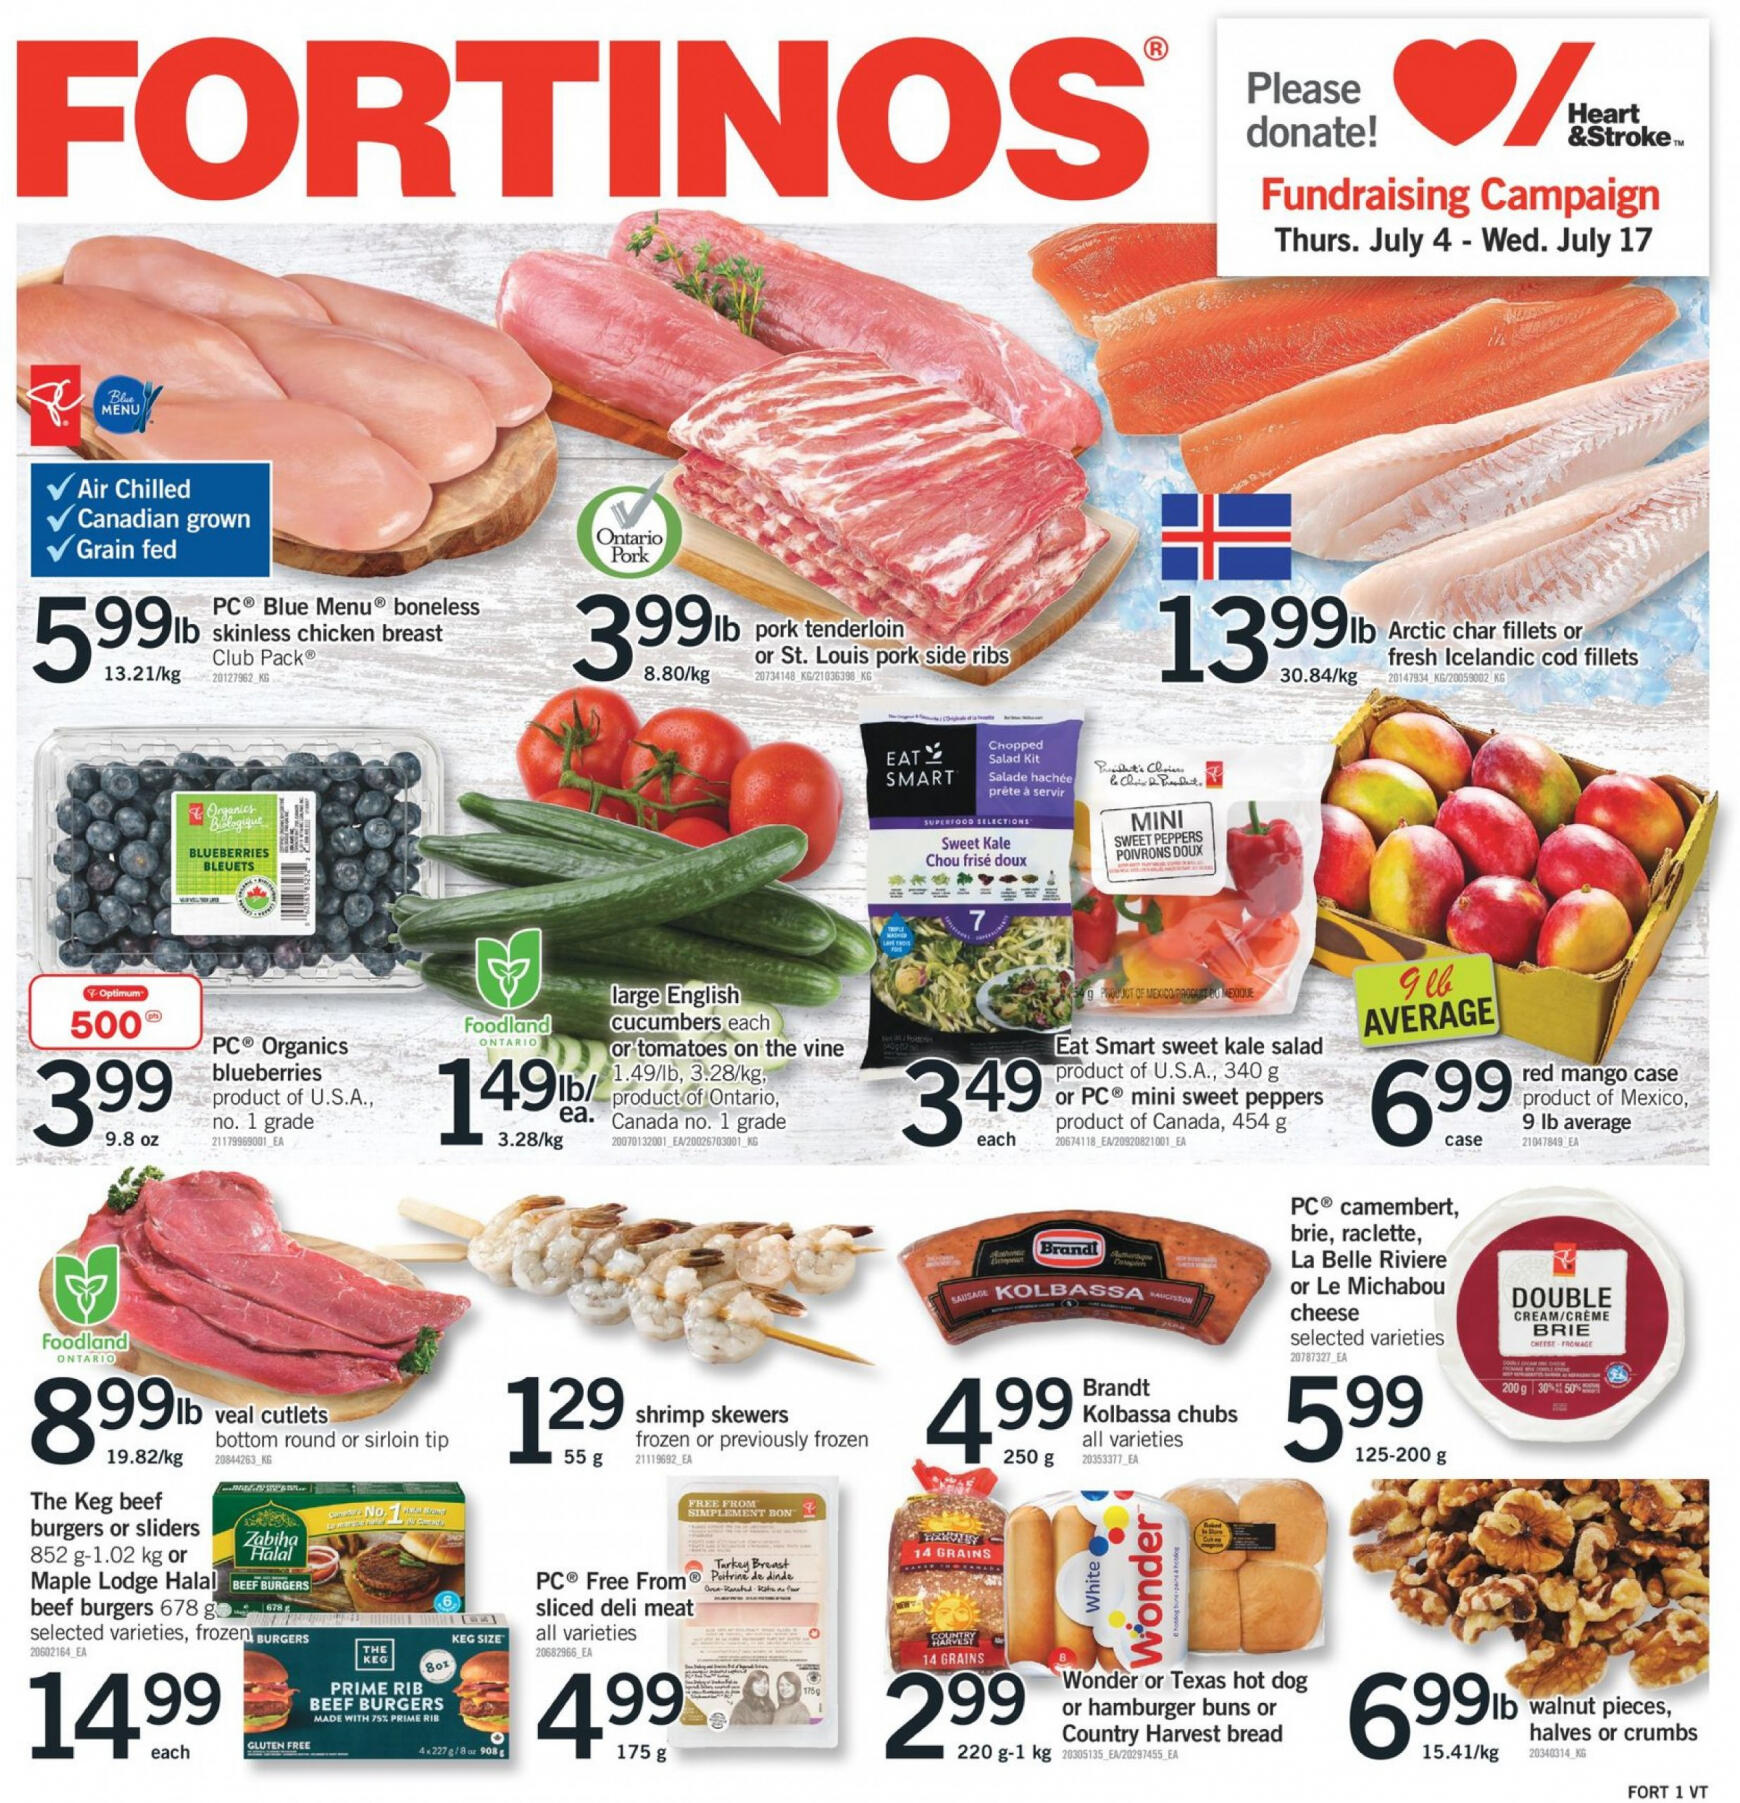 fortinos - Fortinos flyer current 11.07. - 17.07.